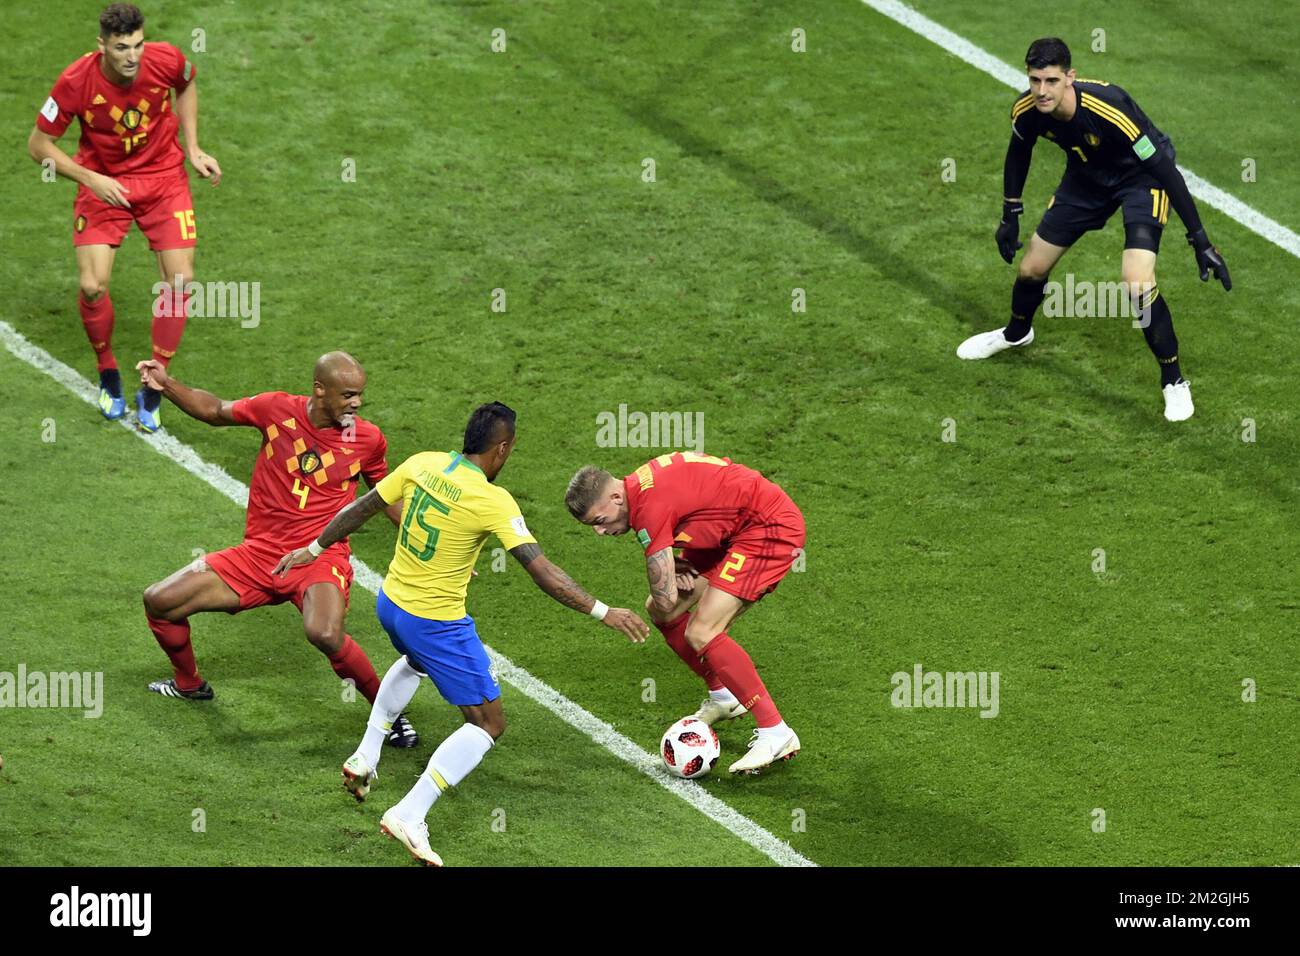 Belgium's Vincent Kompany, Brazil's Paulinho, Belgium's Toby Alderweireld and Belgium's goalkeeper Thibaut Courtois pictured during a soccer game between Belgian national soccer team the Red Devils and Brazil in Kazan, Russia, Friday 06 July 2018, the quarter-finals of the 2018 FIFA World Cup. BELGA PHOTO LAURIE DIEFFEMBACQ  Stock Photo